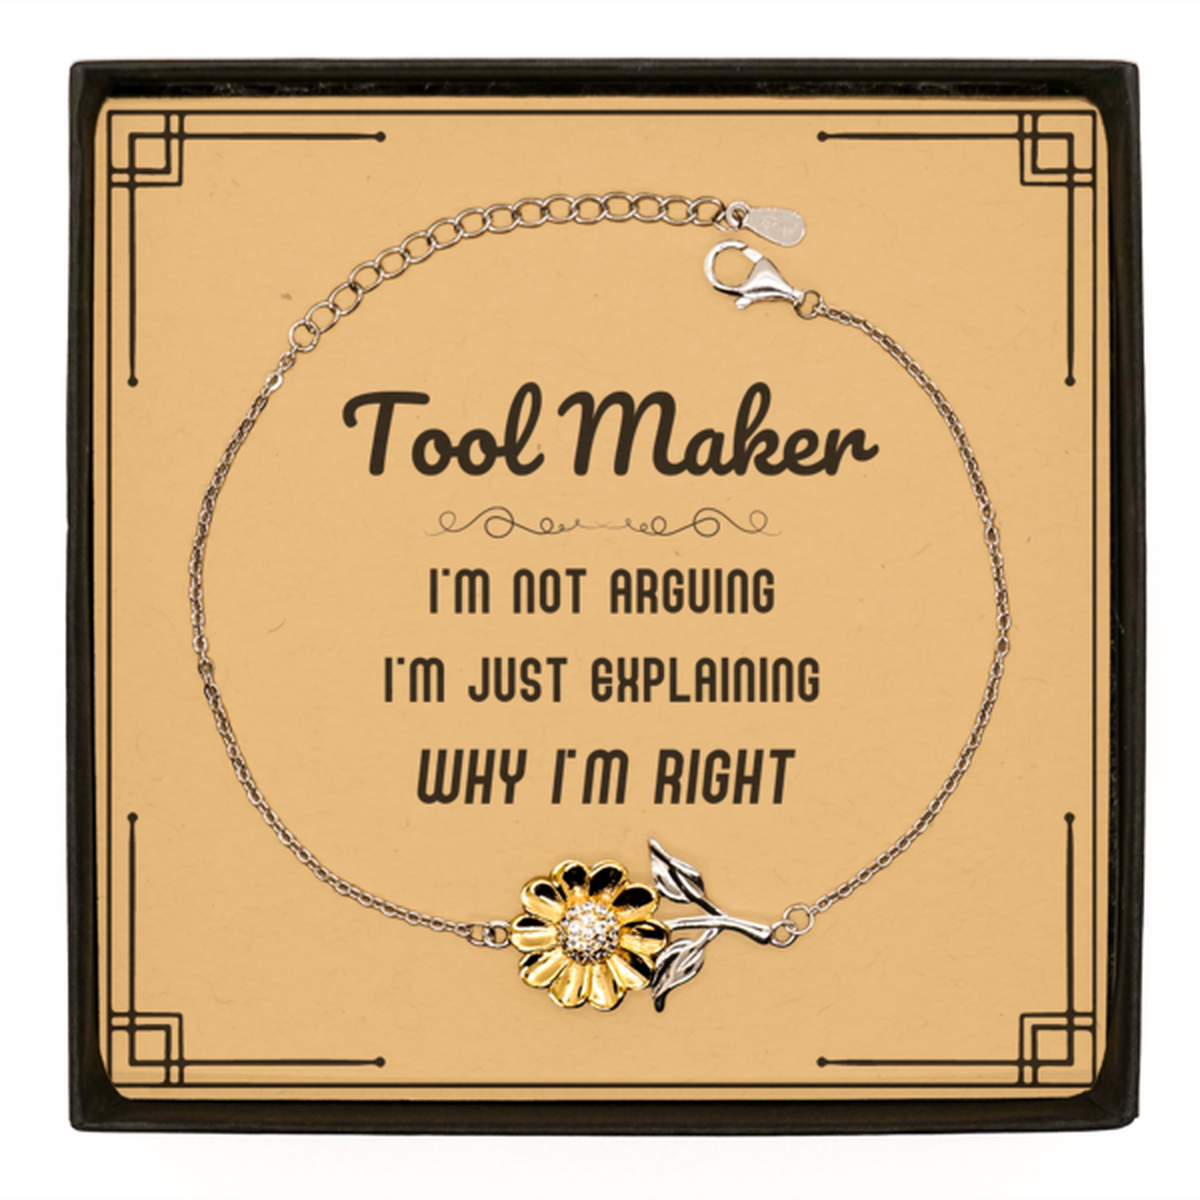 Tool Maker I'm not Arguing. I'm Just Explaining Why I'm RIGHT Sunflower Bracelet, Funny Saying Quote Tool Maker Gifts For Tool Maker Message Card Graduation Birthday Christmas Gifts for Men Women Coworker